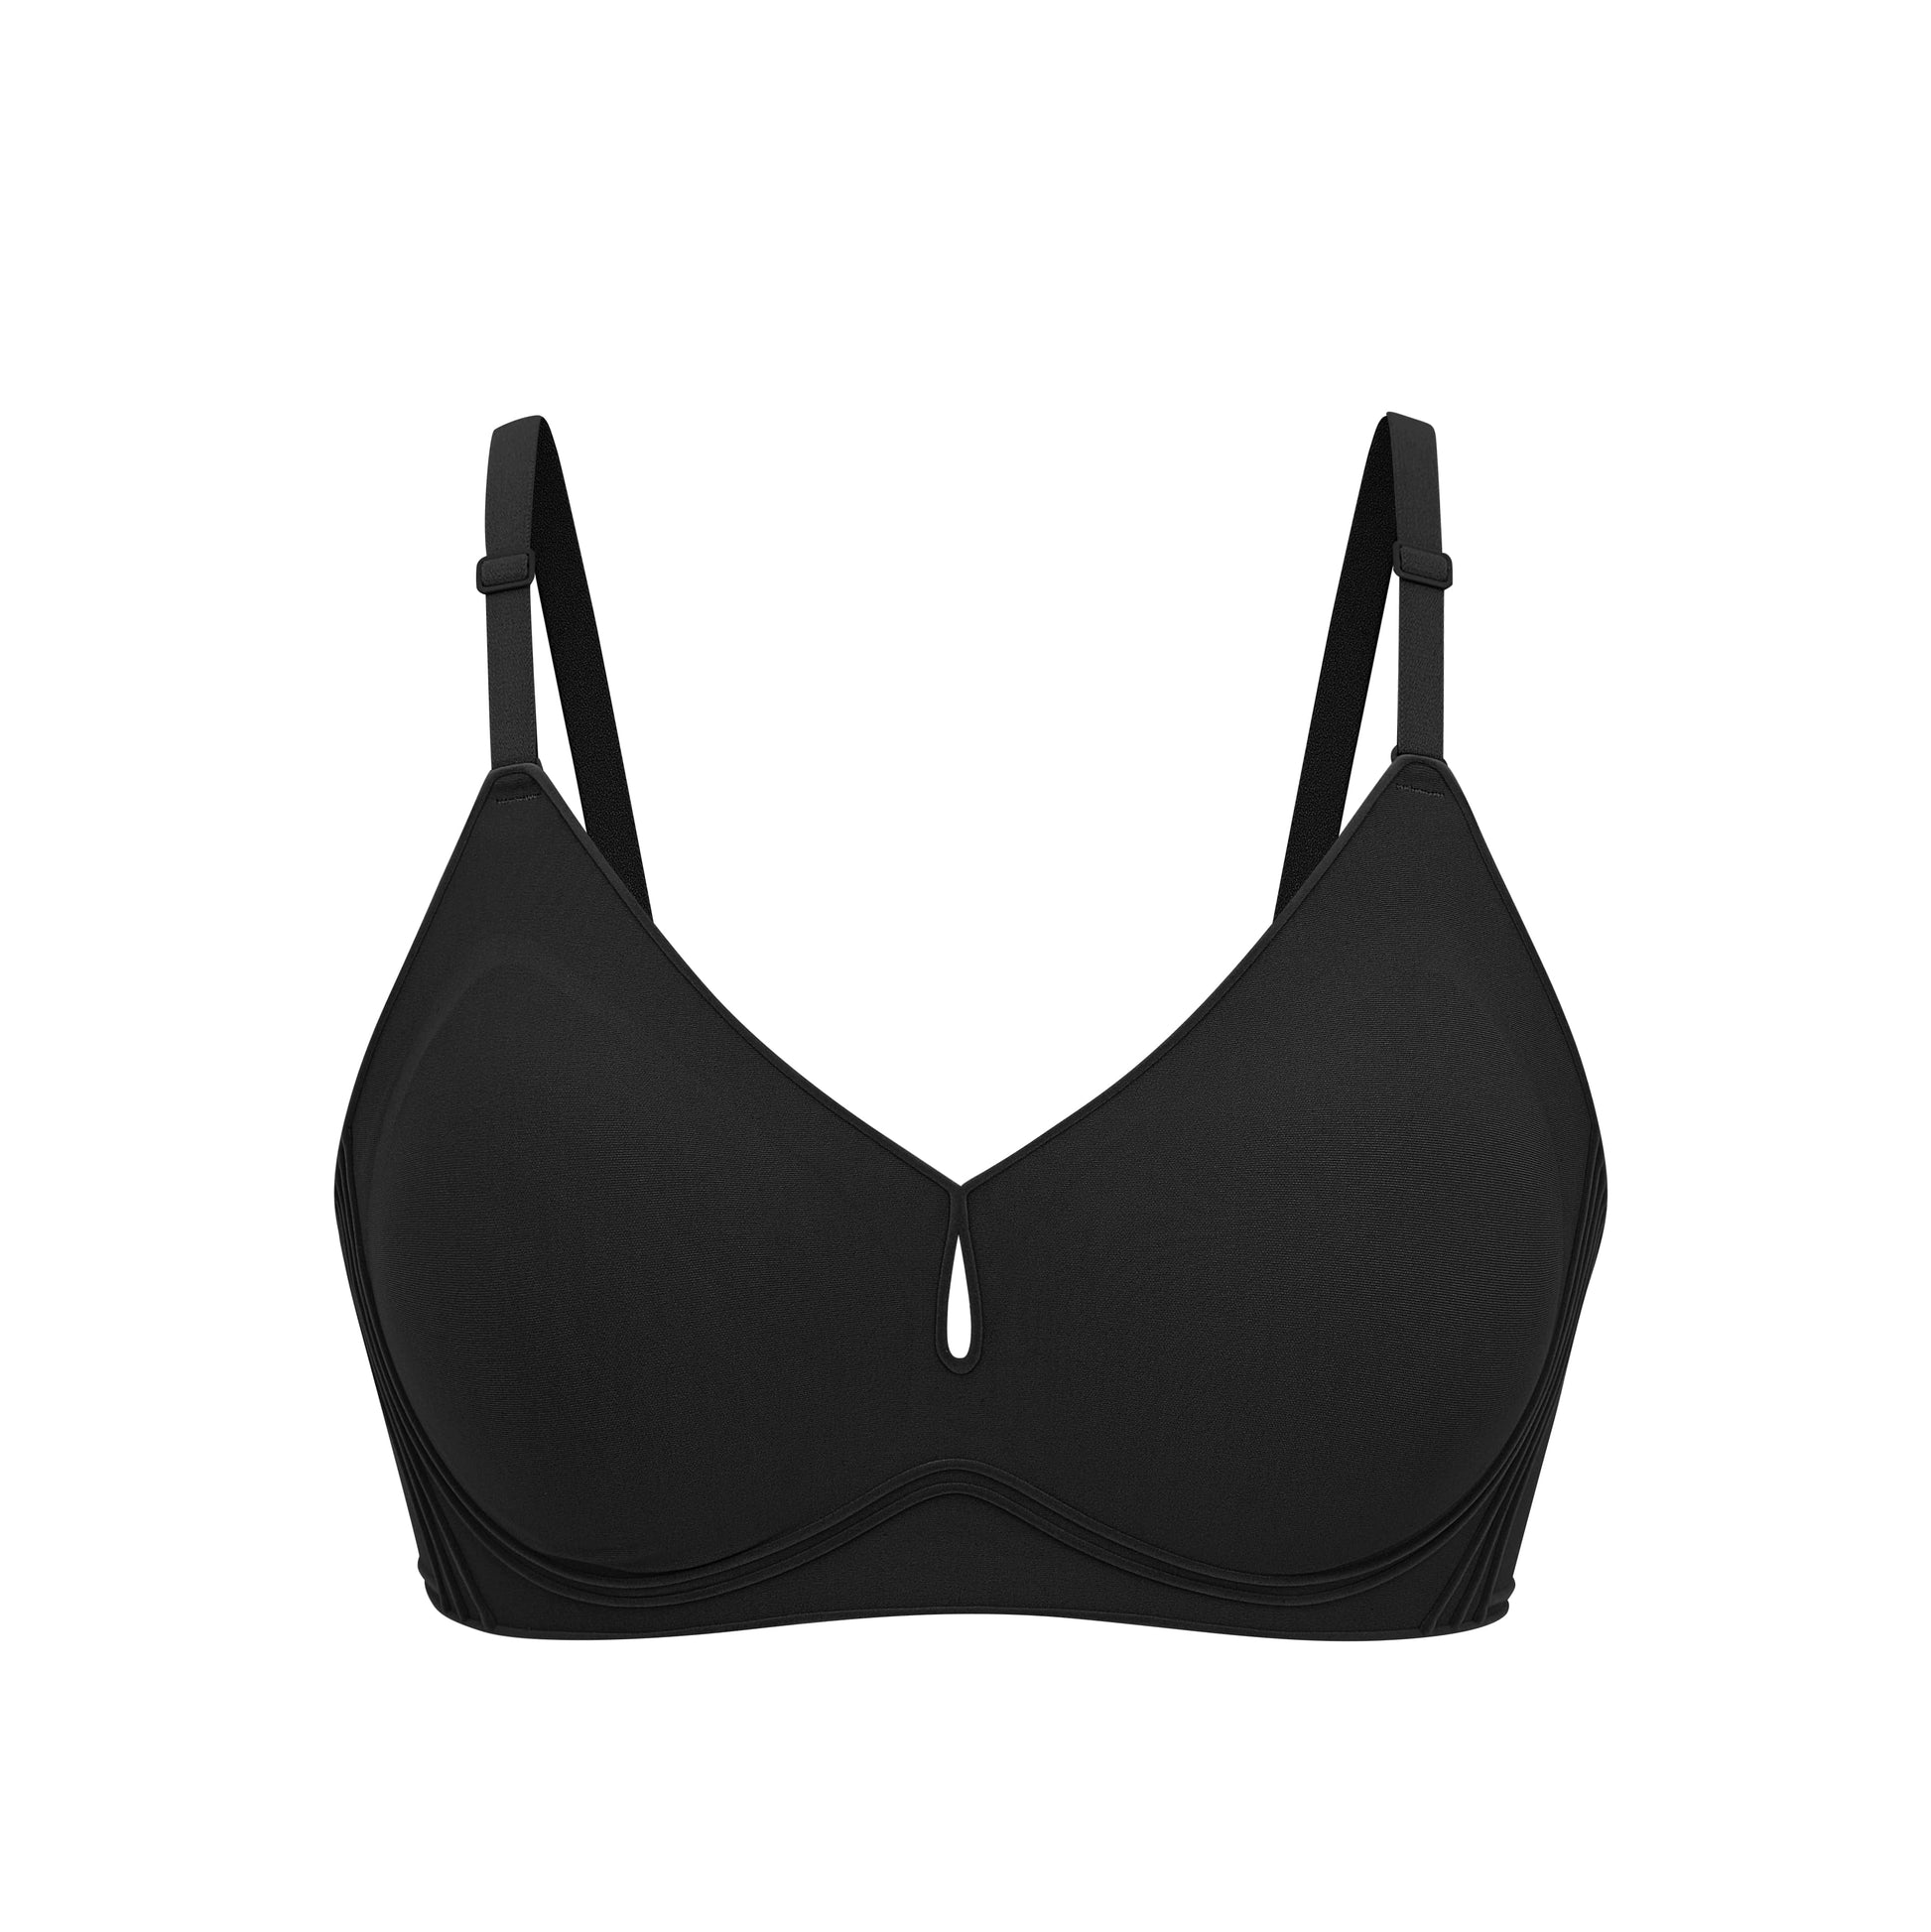 Flat lay image of black bra with plunge neckline and center cutout